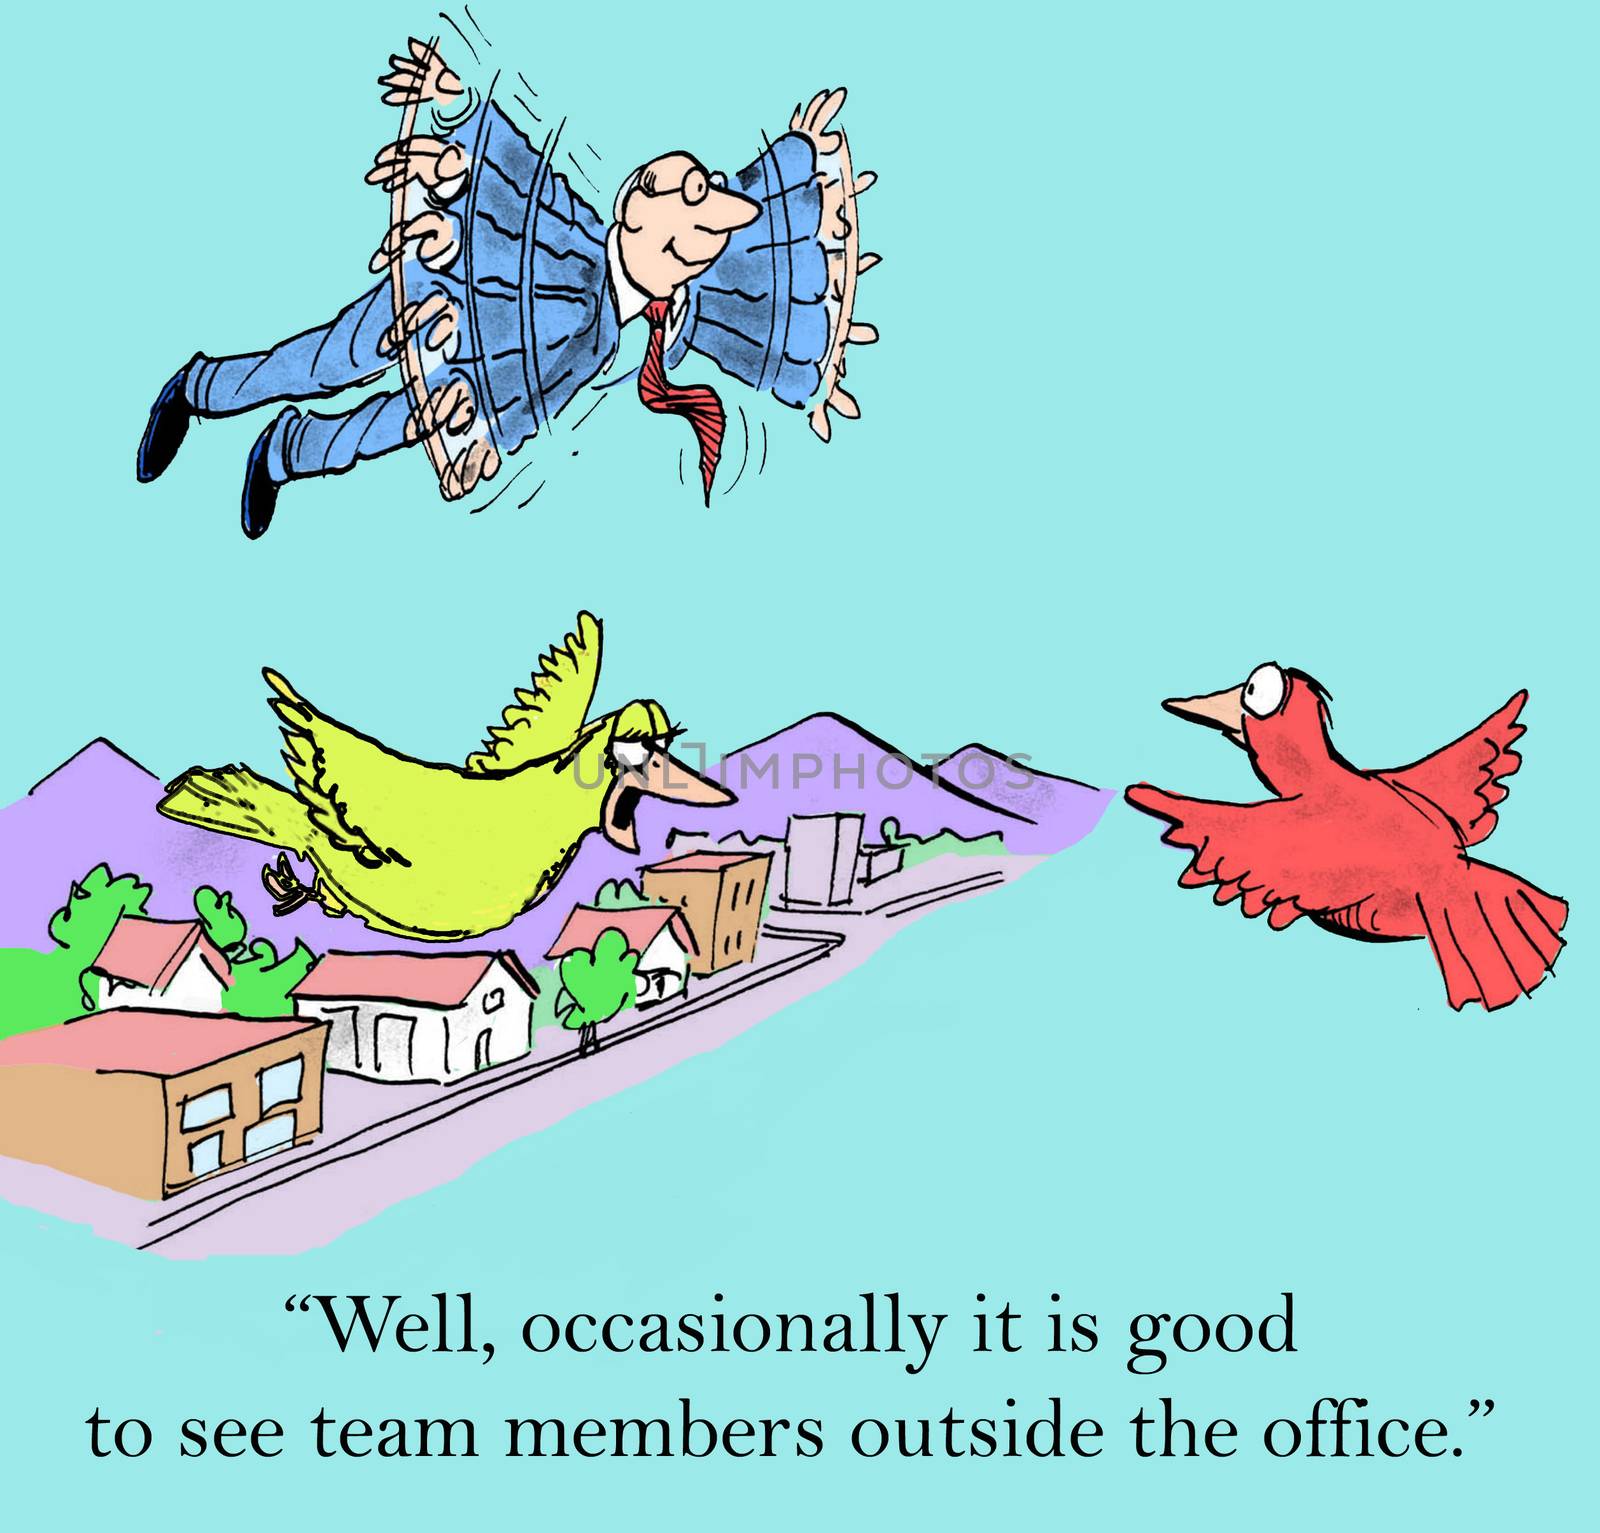 "Well, occasionally it is good to see team members outside the office."